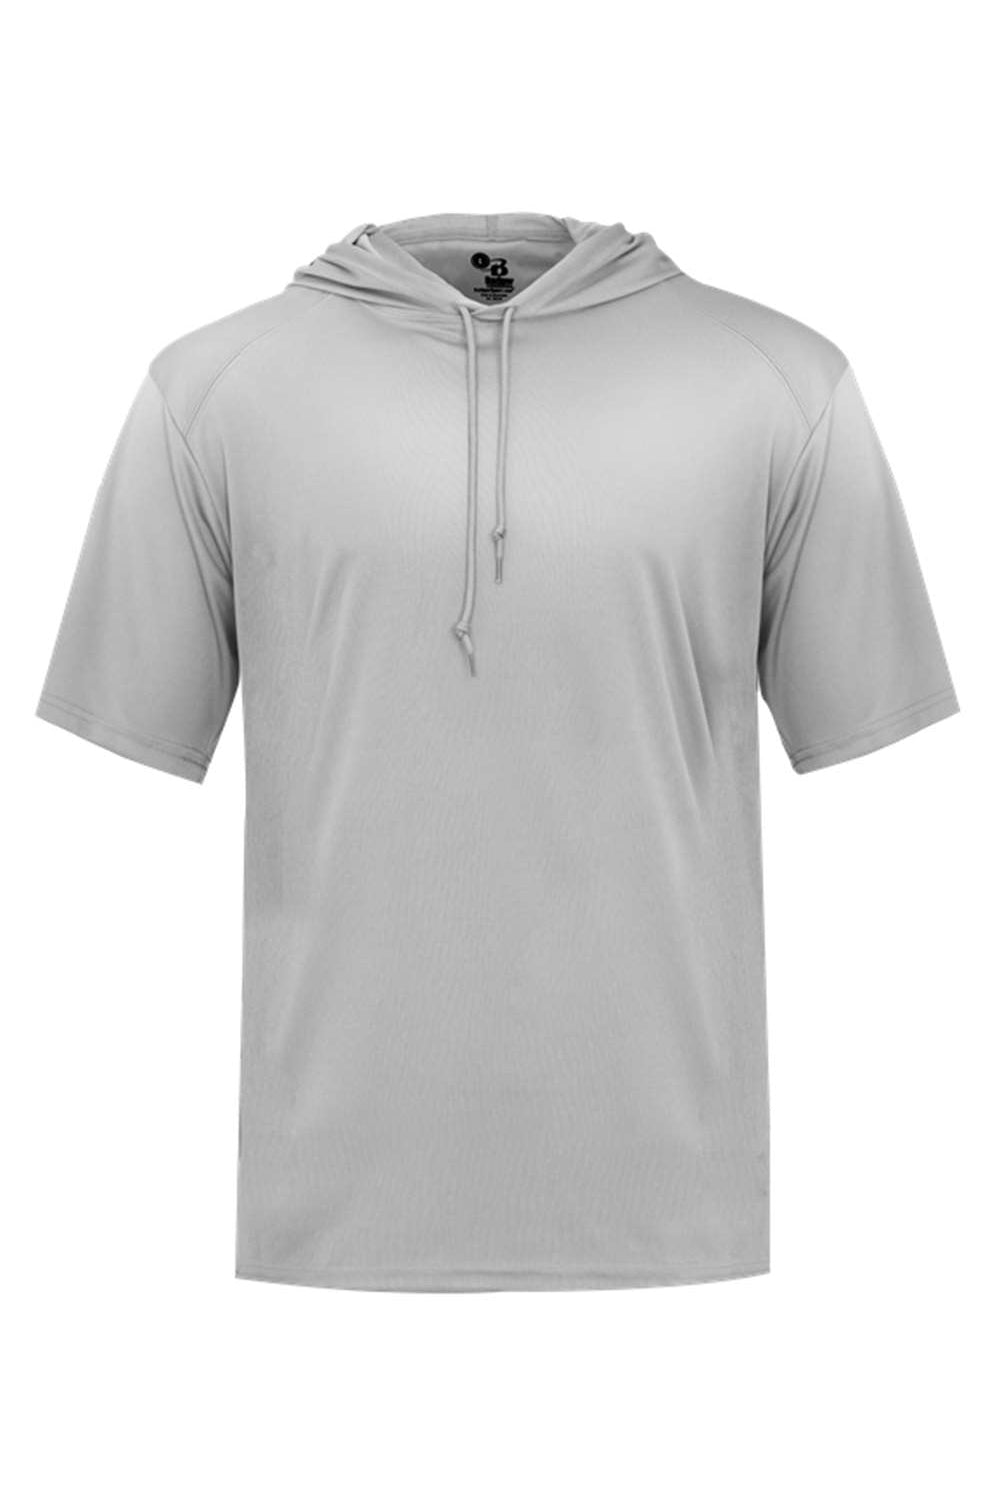 Badger 4123 Mens B-Core Moisture Wicking Hooded T-Shirt Hoodie Silver Grey Flat Front